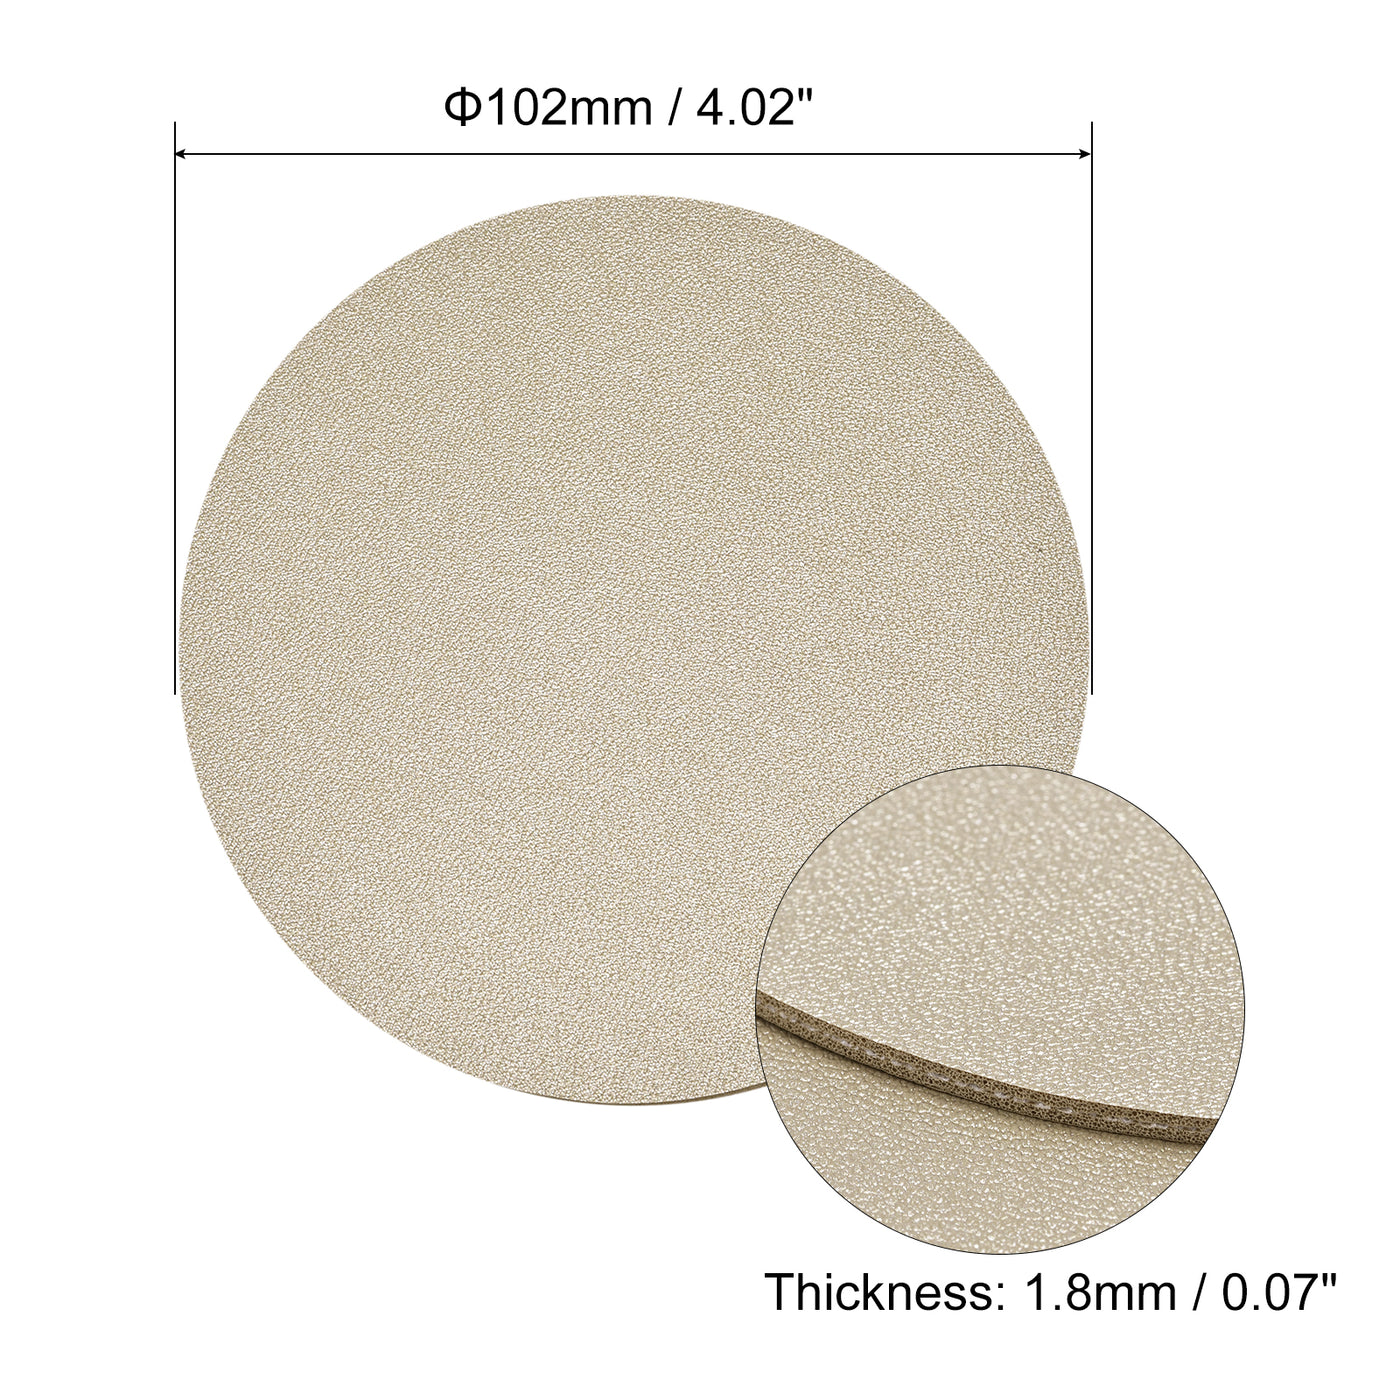 uxcell Uxcell 102mm(4.02") Round Coasters PU Cup Mat Pad for Tableware Gold Tone 2pcs